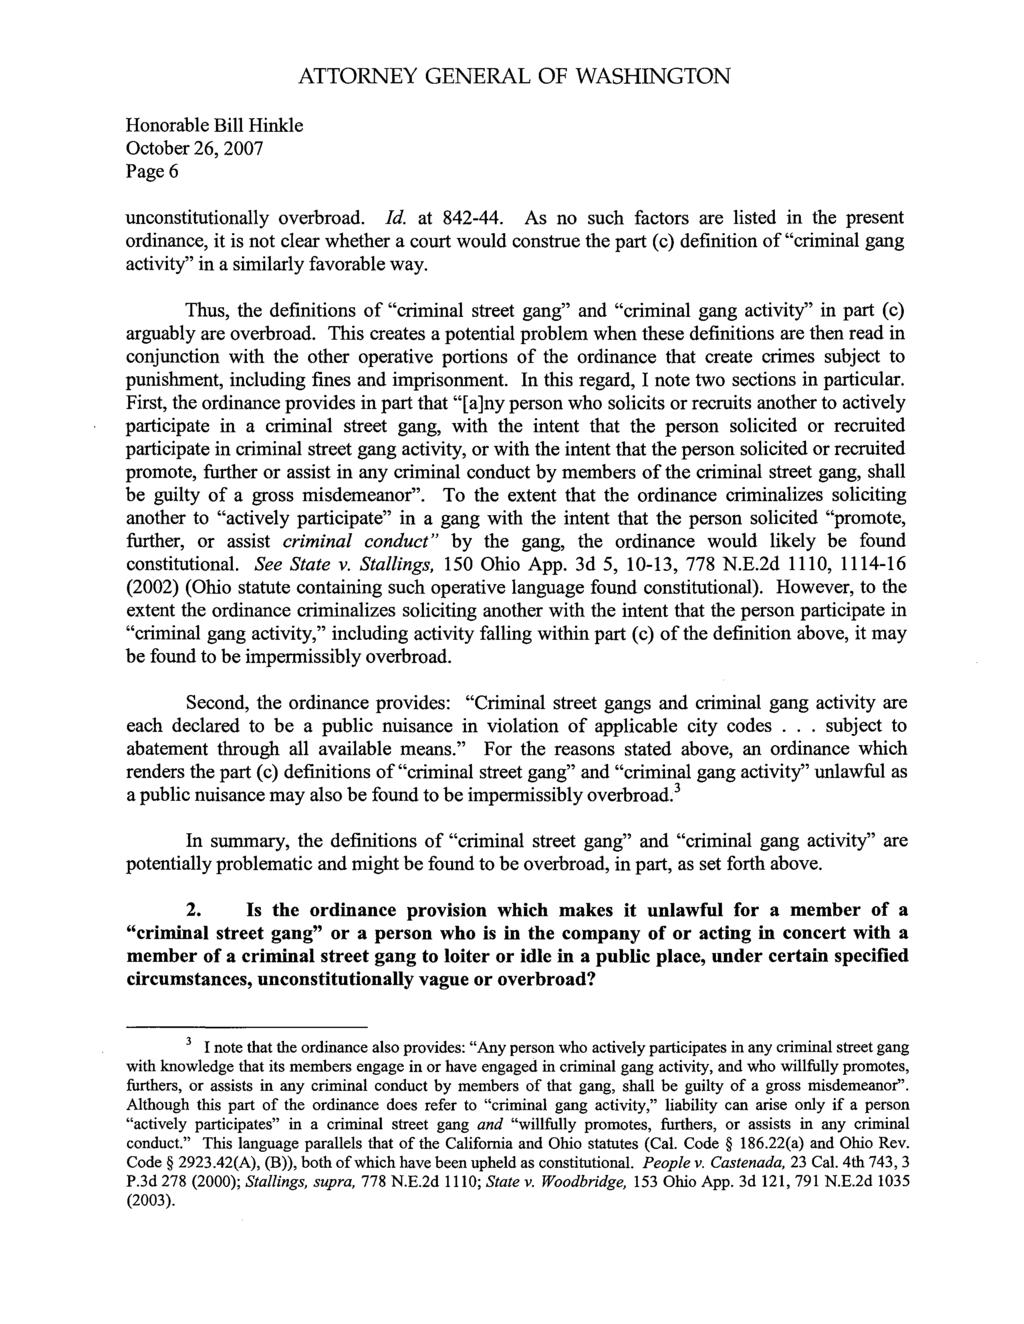 Page6 unconstitutionally overbroad. Id. at 842-44.